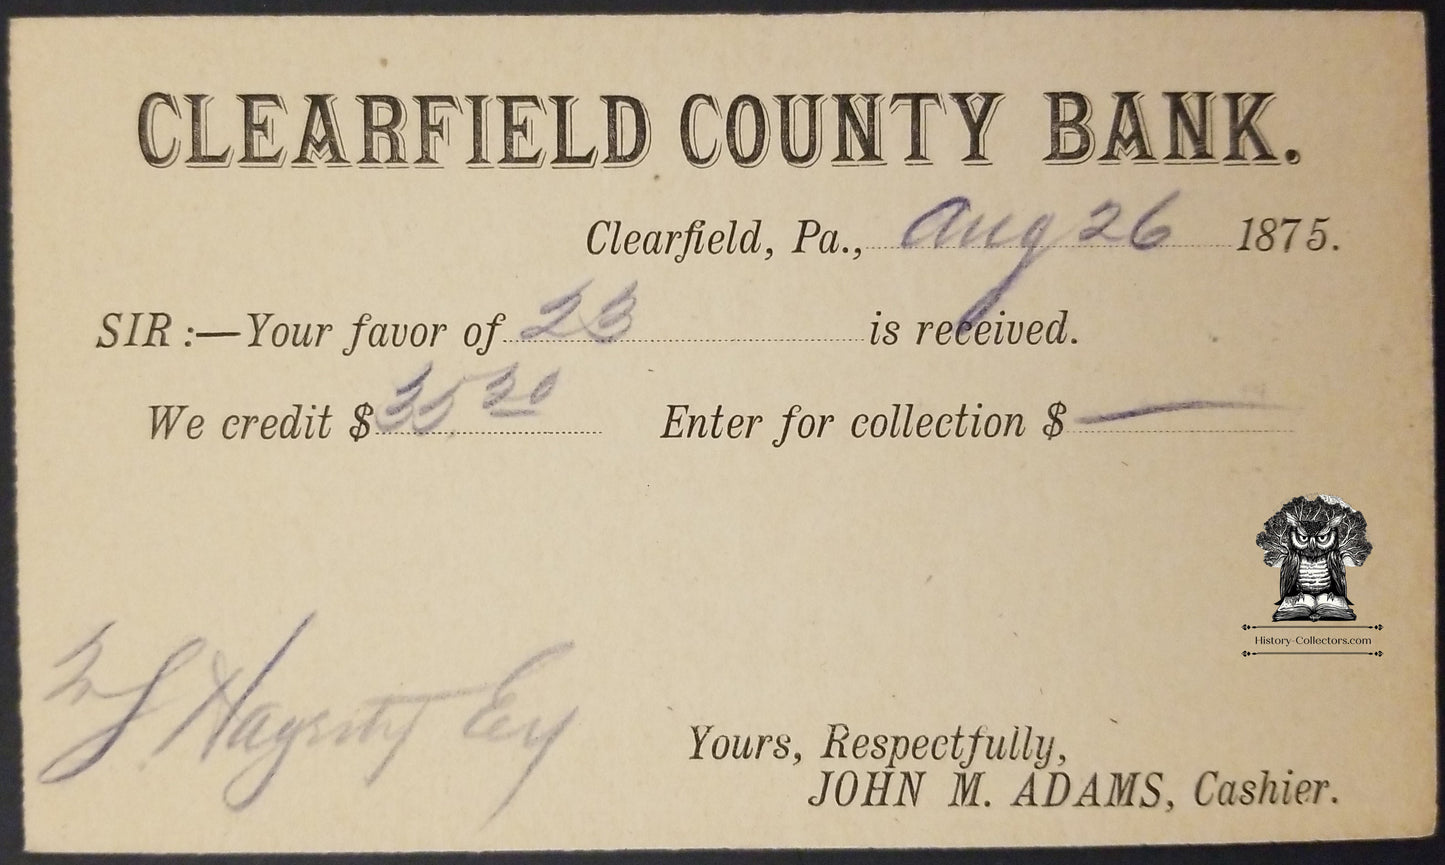 1875 Clearfield County Bank Business Postcard - Hegarty Crossroads PA - One Cent Liberty Postal Card - Scott UX1 UX3 UX3a